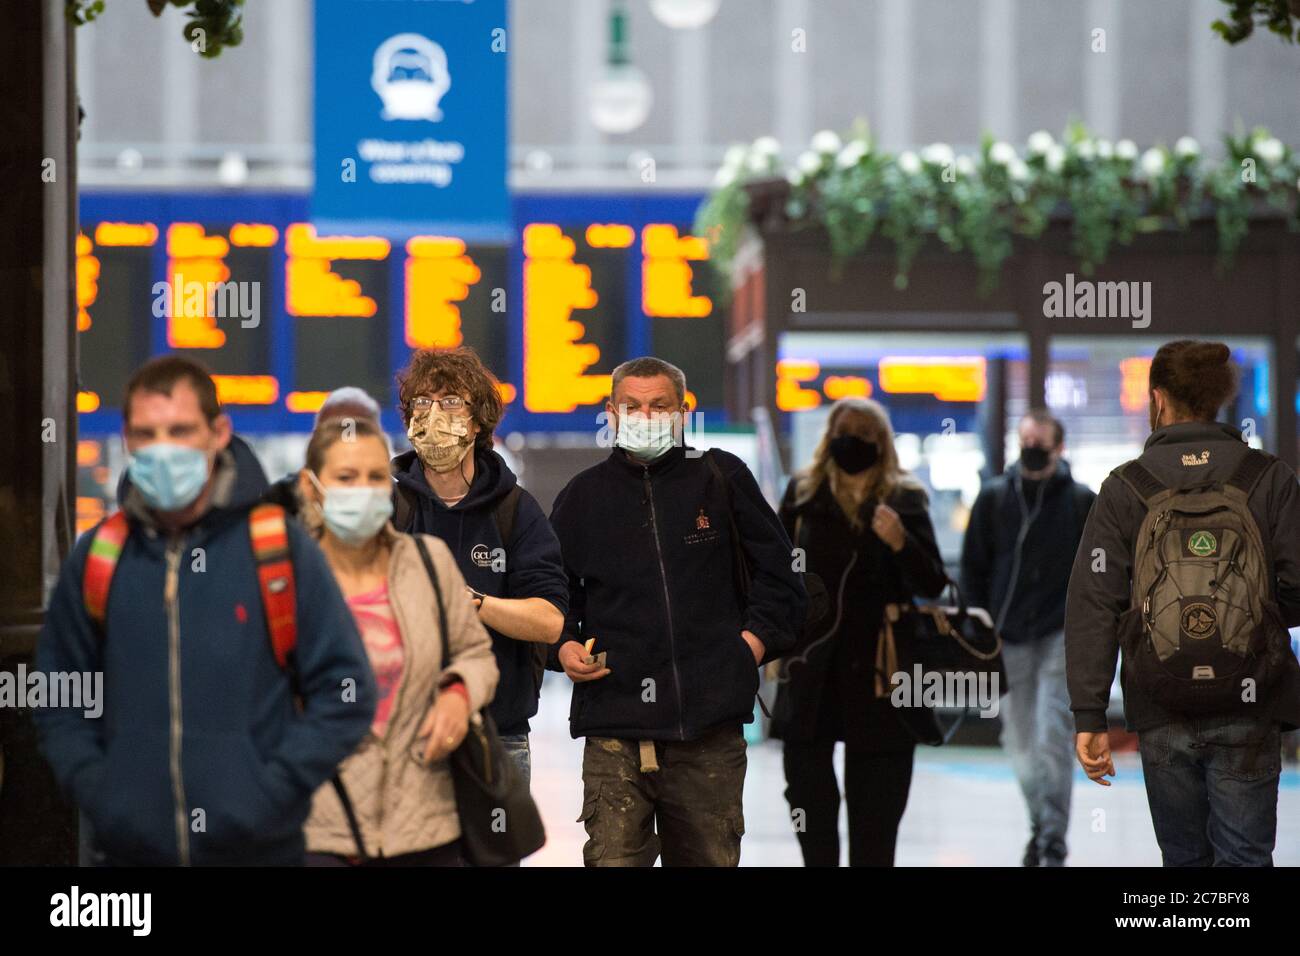 Glasgow, Scotland, UK. 16th July, 2020. Pictured: People wearing face masks and face coverings during their daily train commute at Central Station in the city centre. The Scottish Government made it mandatory that face coverings are worn when travelling on public transport in Scotland to help prevent the spread of coronavirus. Credit: Colin Fisher/Alamy Live News Stock Photo